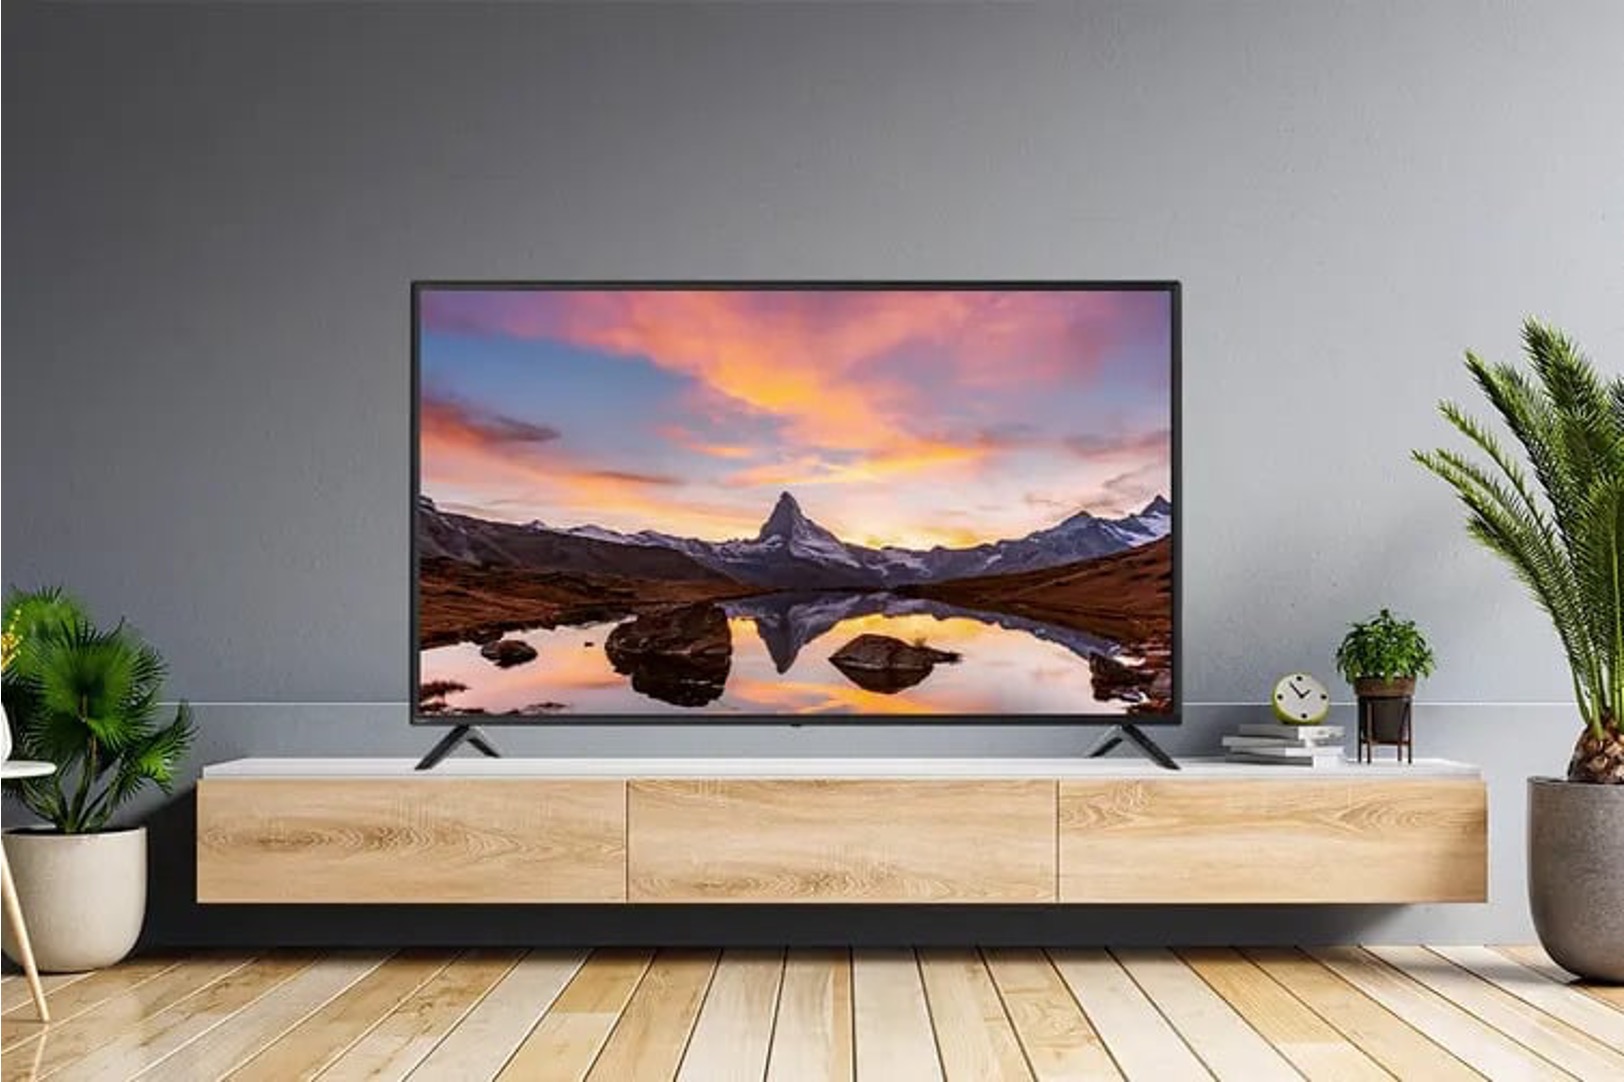 Which LED TV Has The Best Sound Quality